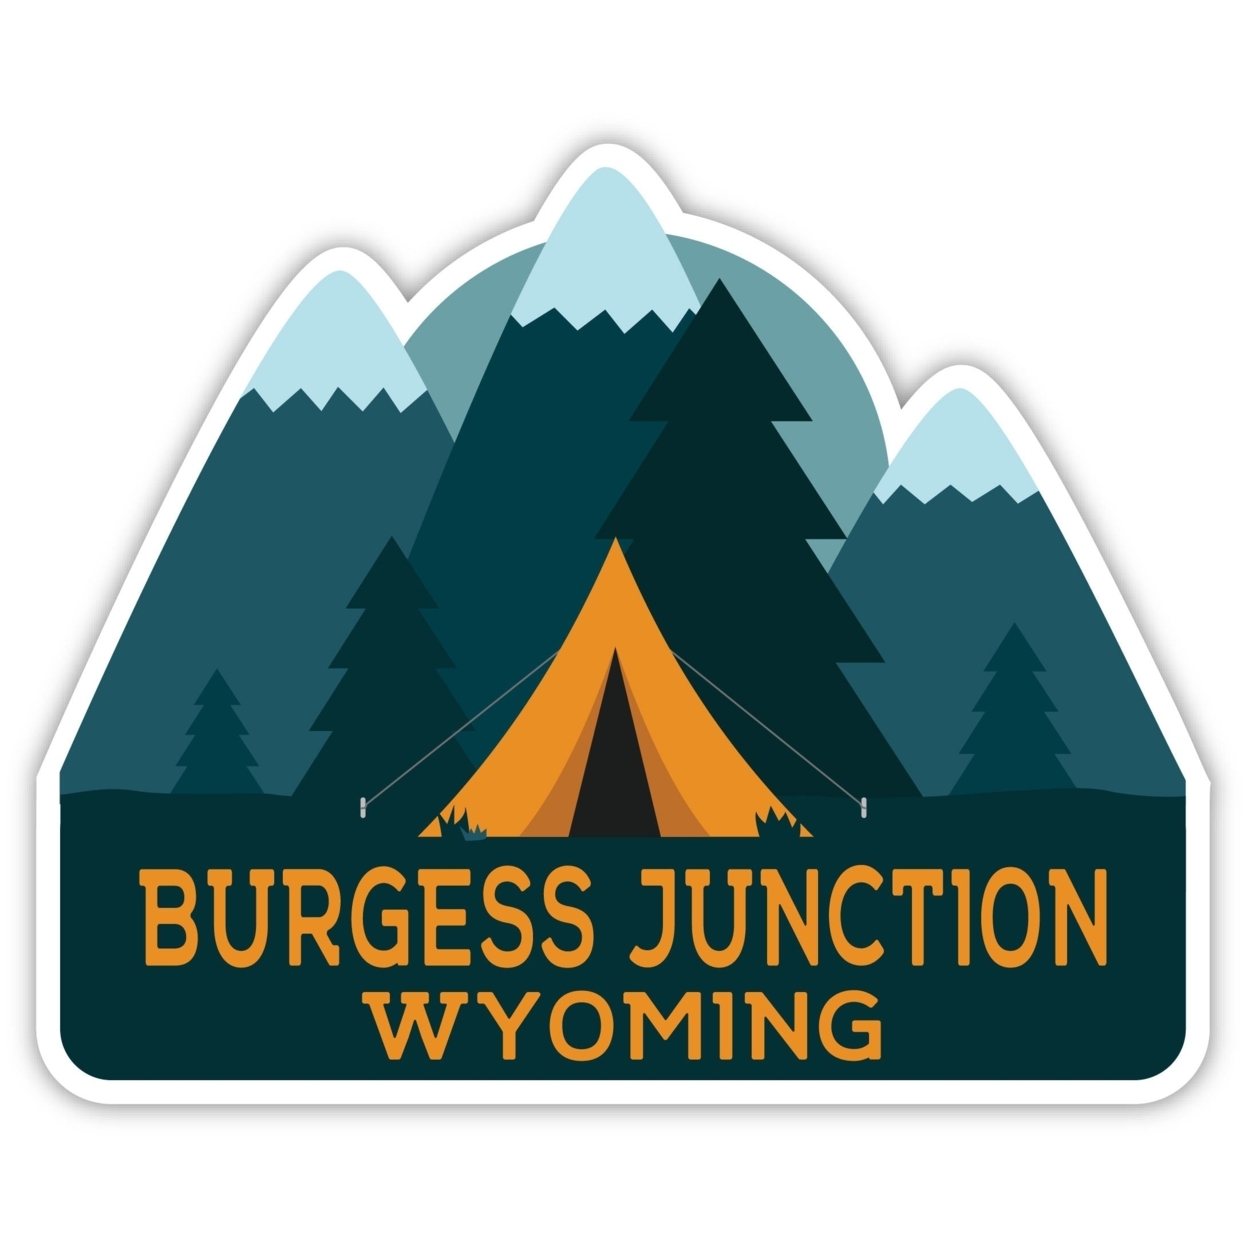 Burgess Junction Wyoming Souvenir Decorative Stickers (Choose Theme And Size) - 4-Pack, 12-Inch, Bear